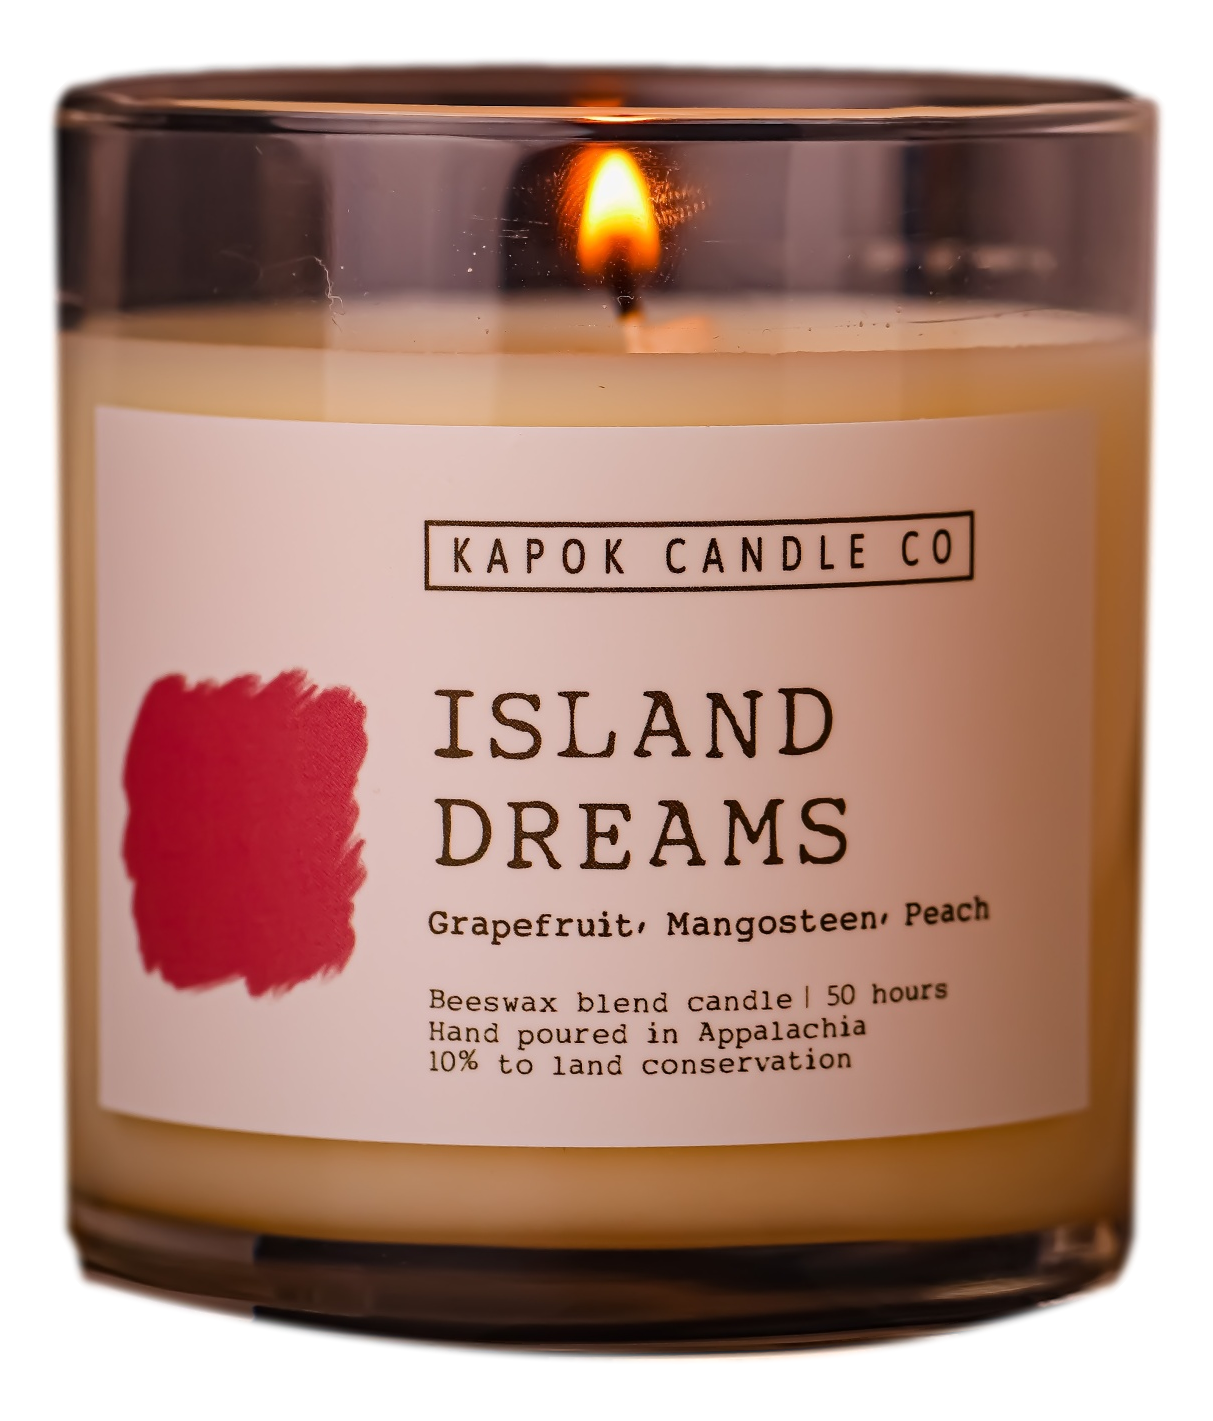 Island Dreams Beeswax Blend Candle, 100% Cotton Wicks, Wooden Lid